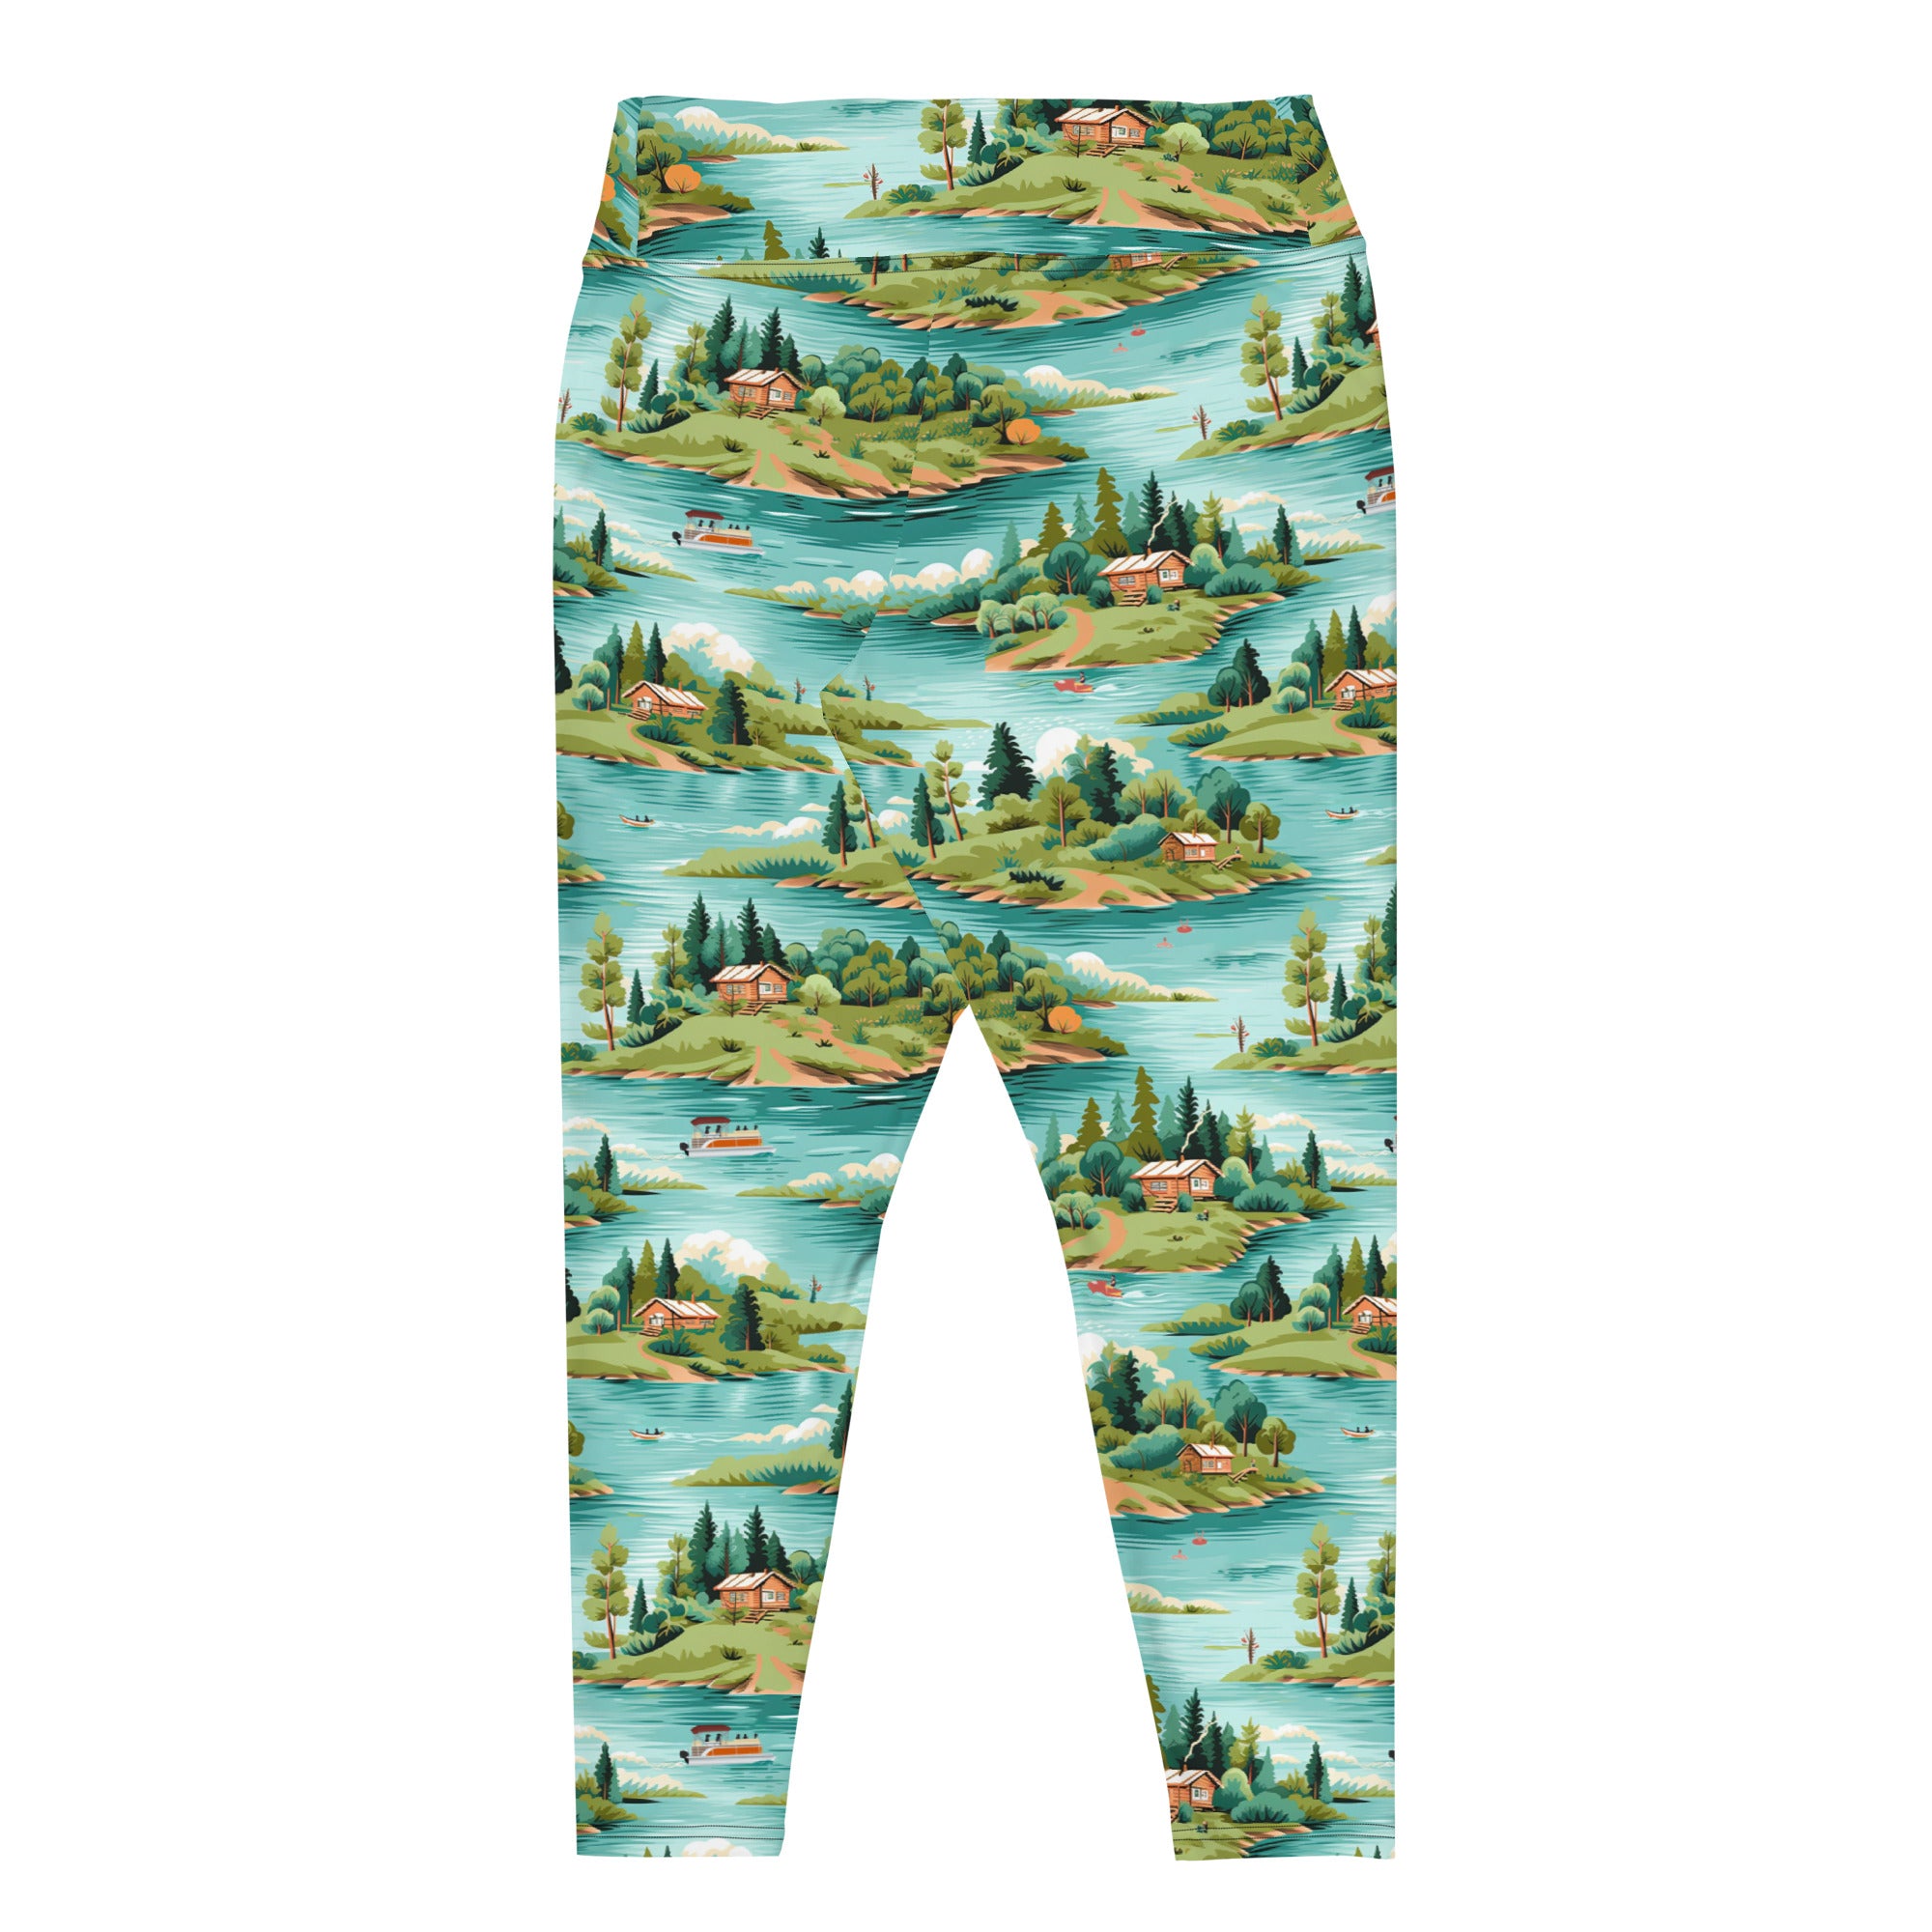 Up North All-Over Print Plus Size Leggings